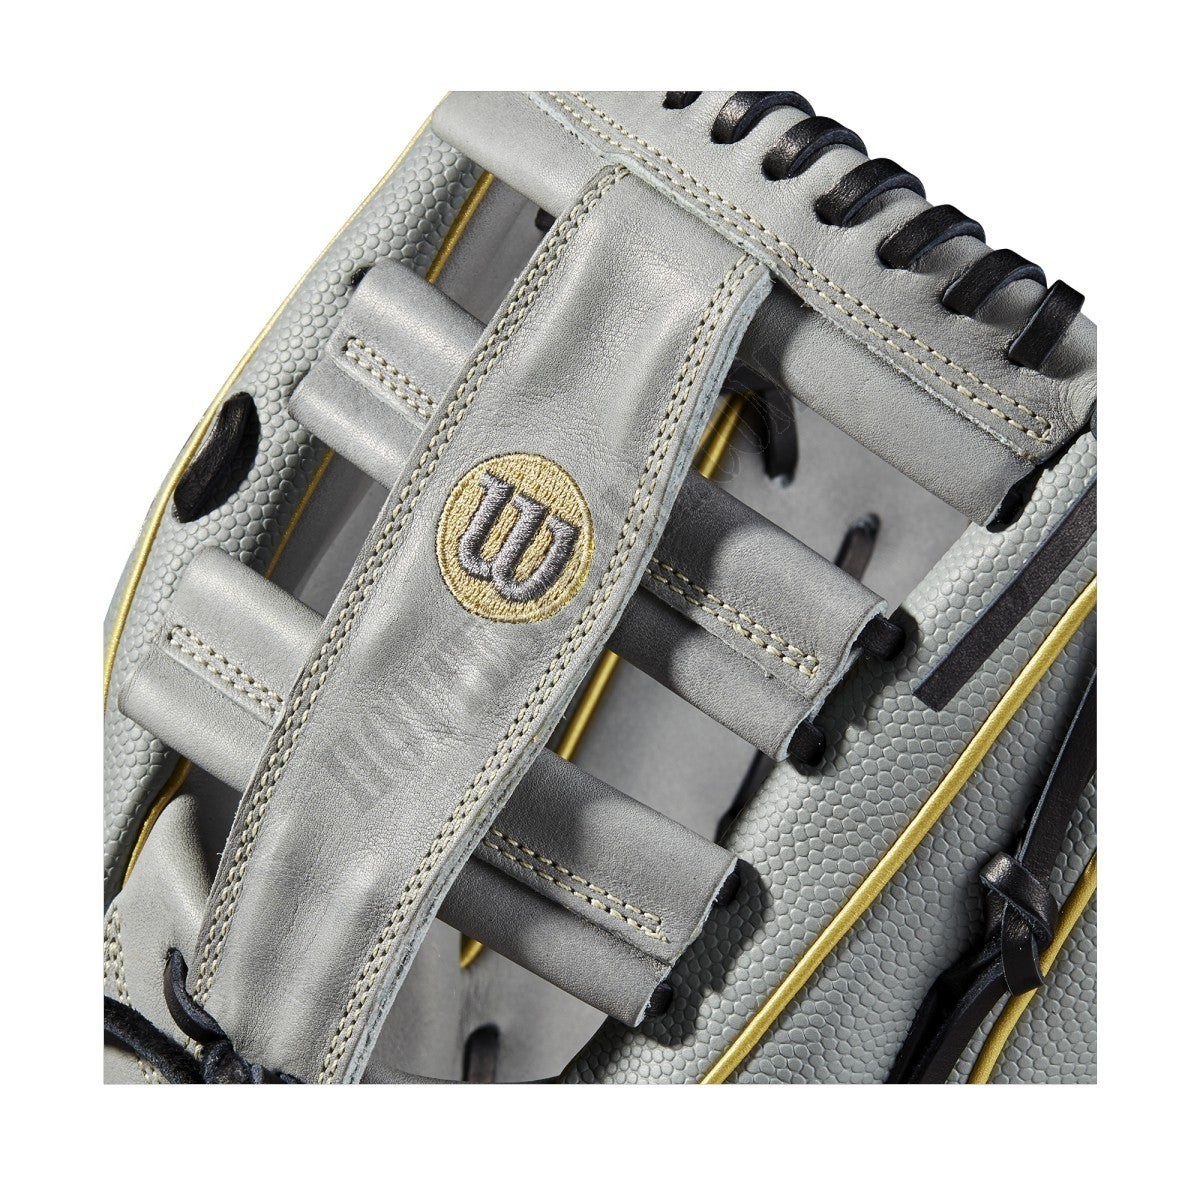 2020 A2000 SP13 13" Slowpitch Softball Glove ● Wilson Promotions - -5